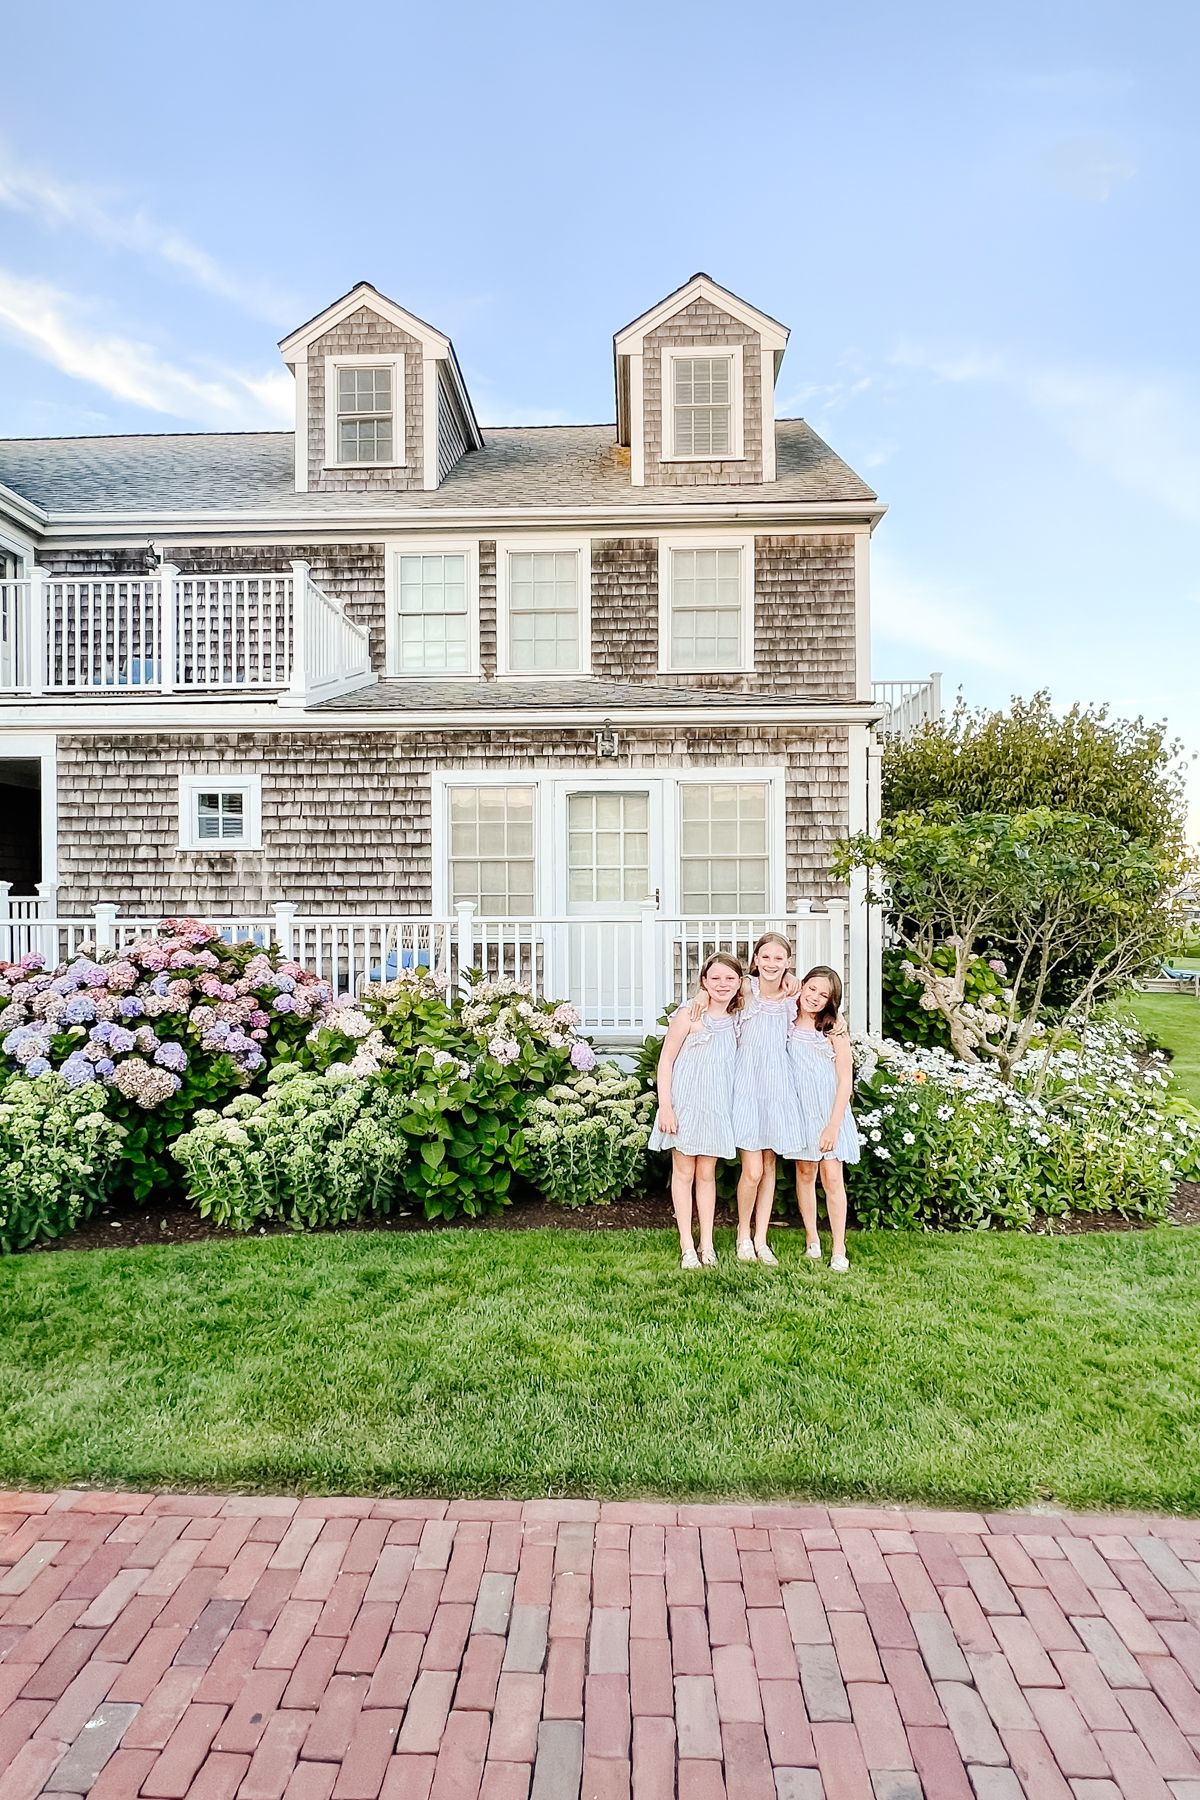 Three little girls in blue dresses in front of a shingled cottage on Nantucket